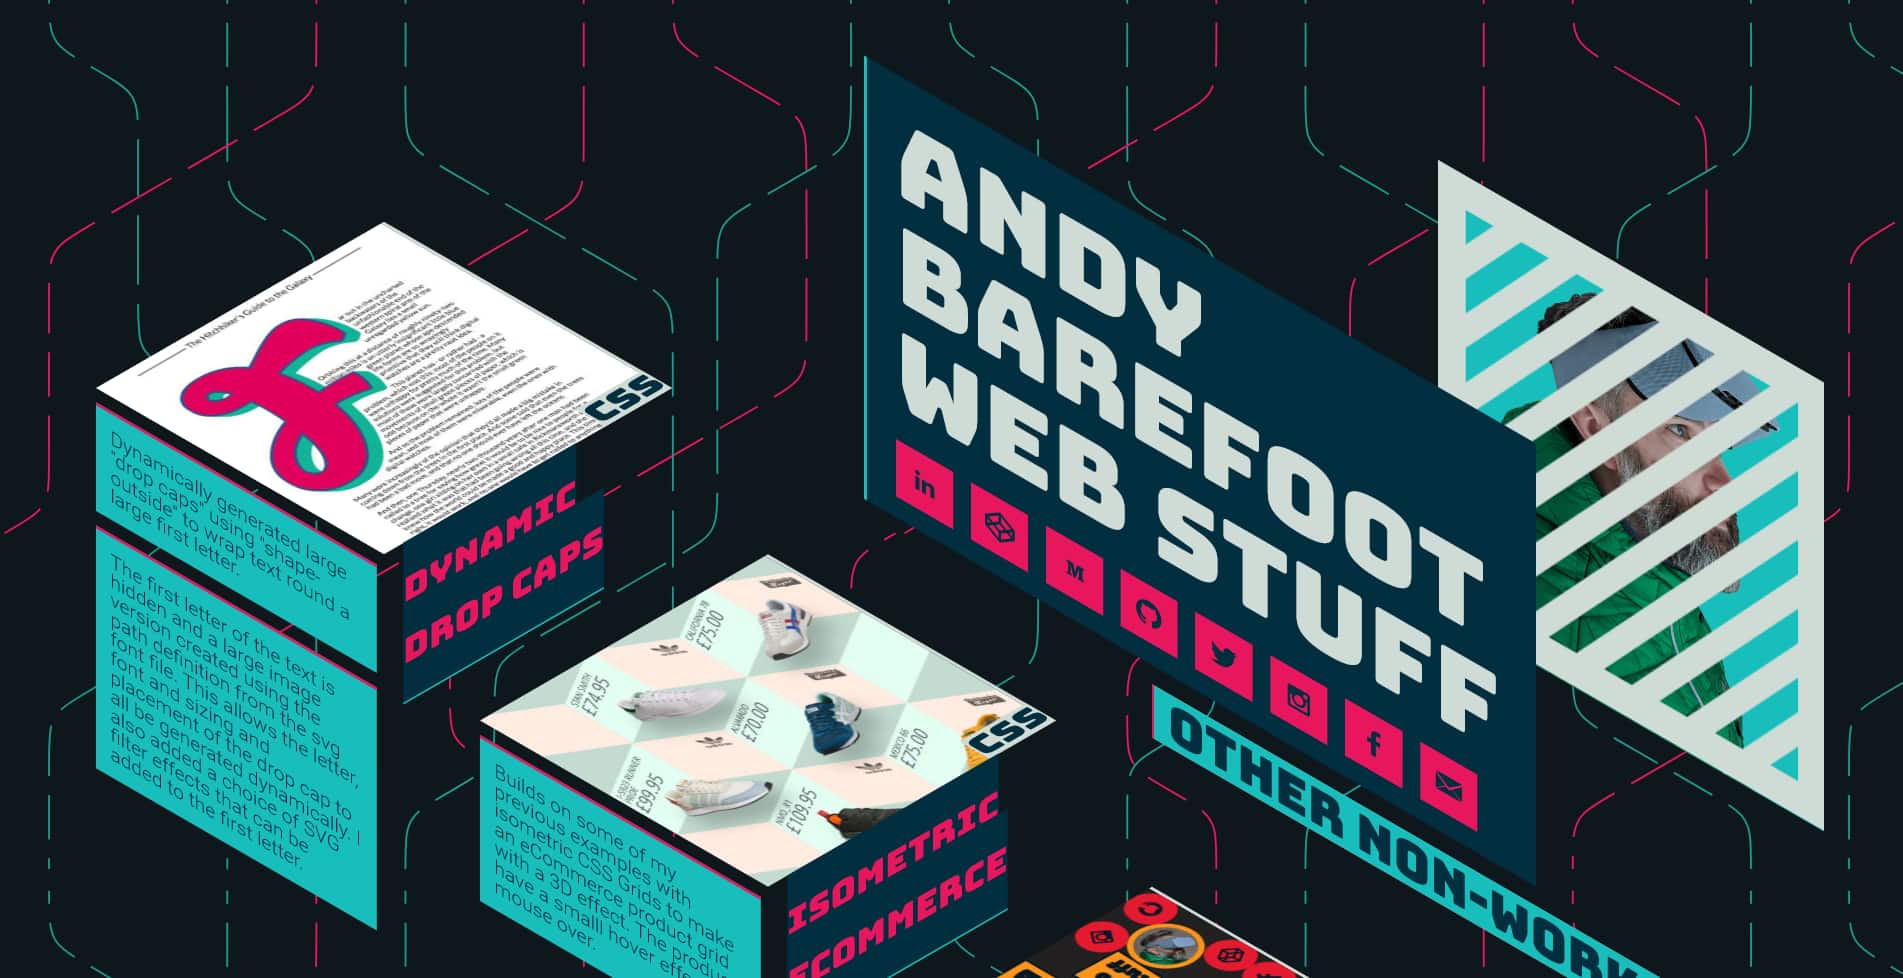 A screenshot from Andy Barefoot's extremely creative website